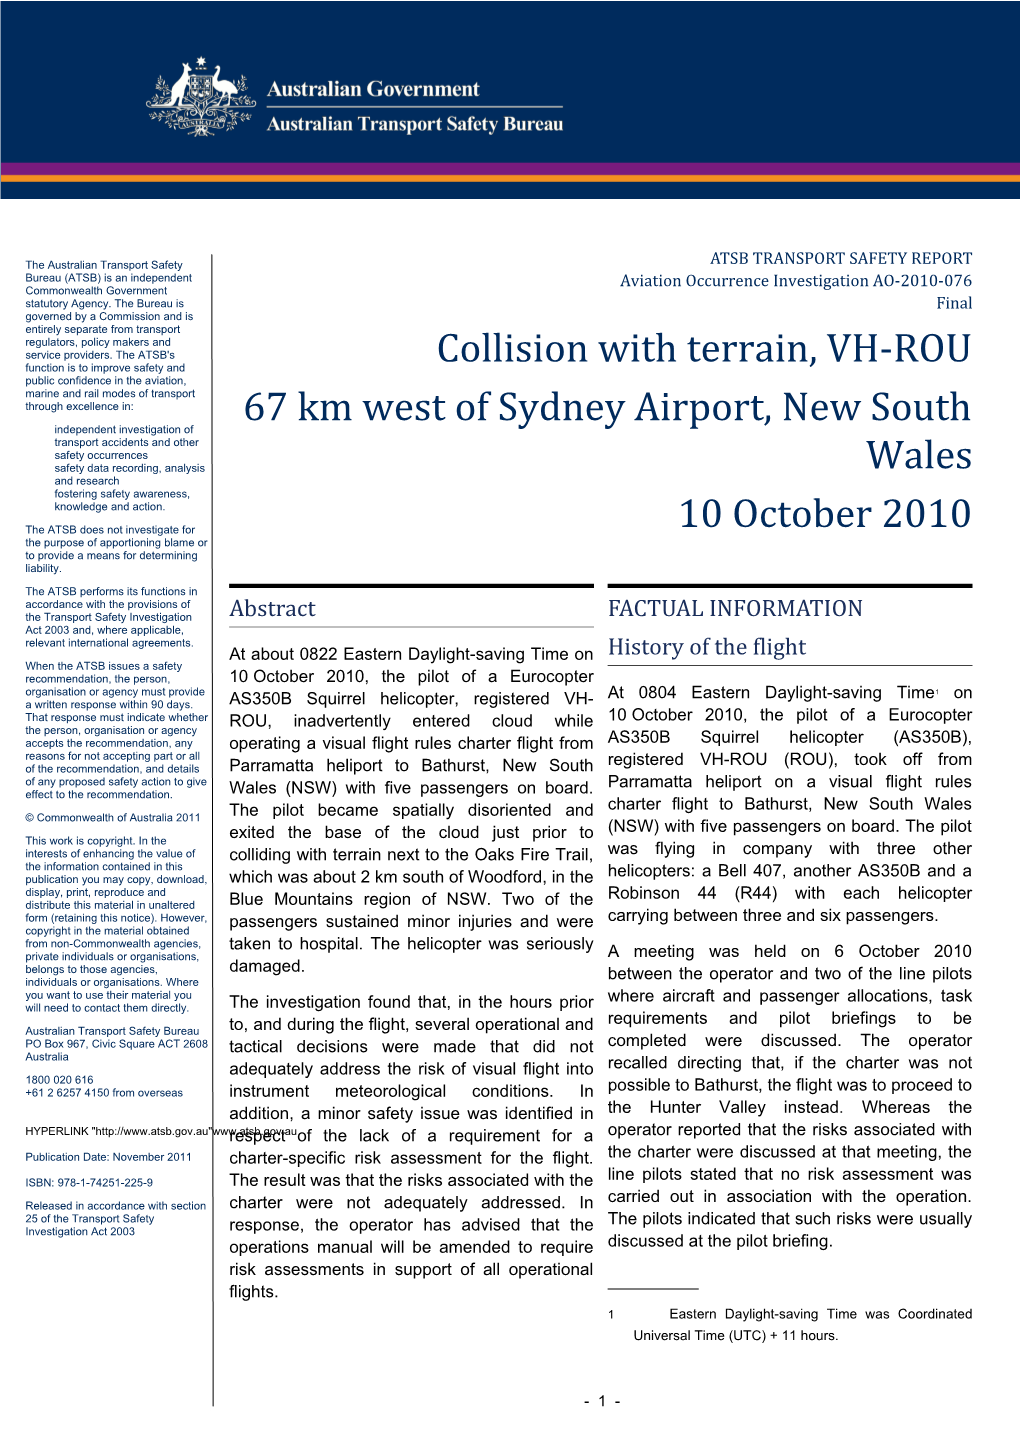 Collision with Terrain, VH-ROU 67 Km West of Sydney Airport, New South Wales 10 October 2010